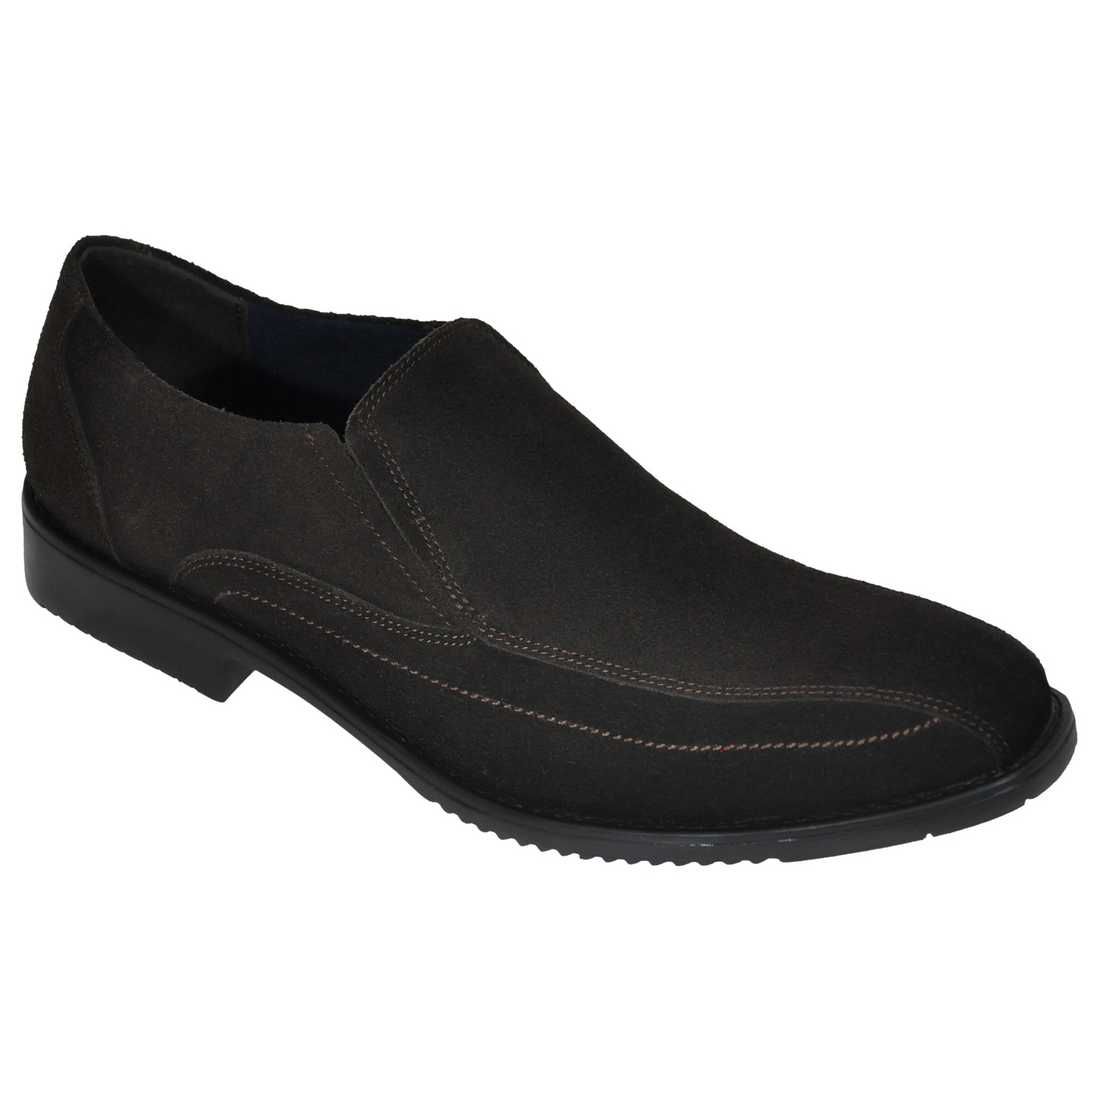 OHM New York Semi Casual Leather Slip-on Shoes